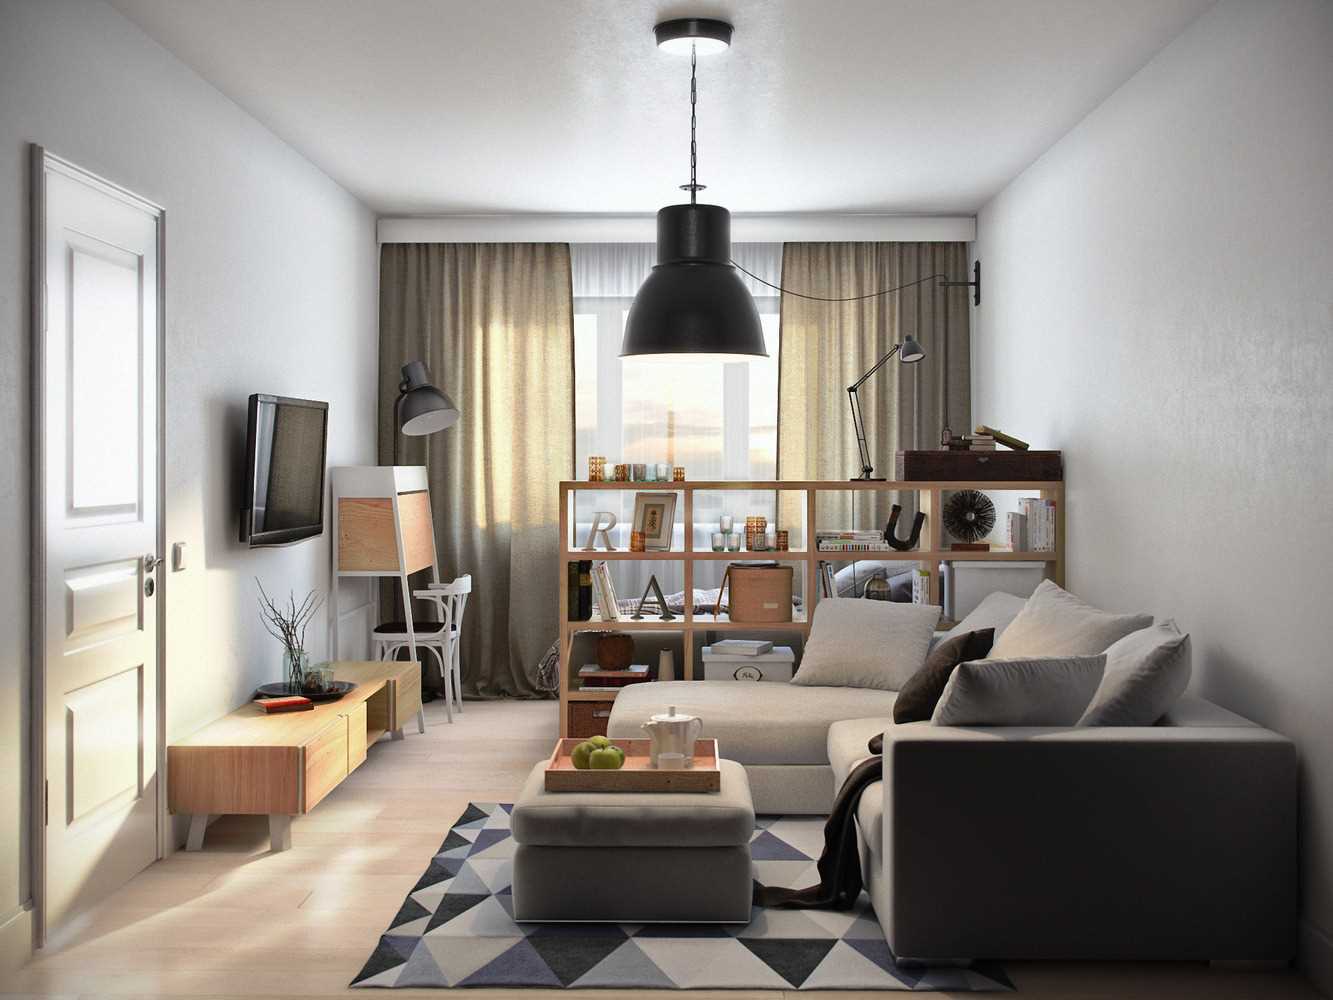 variant of the bright decor of a two-room apartment